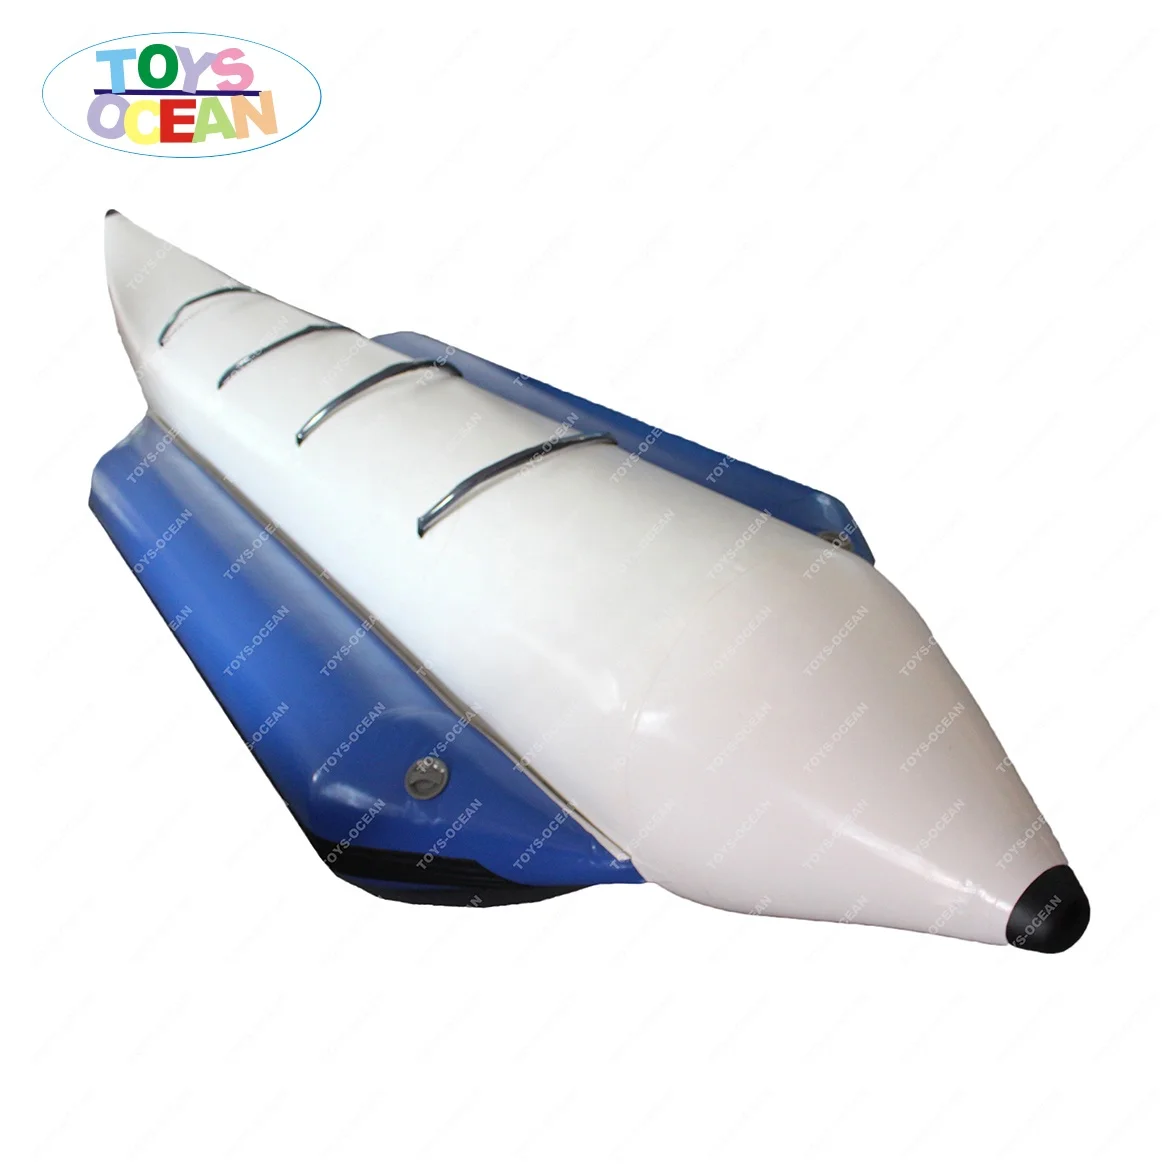 

Banana Boat Aqua Inflable Inflatable Flying Fish Tube Towable Cheap Crazy Sea Water Sport for 8 Players